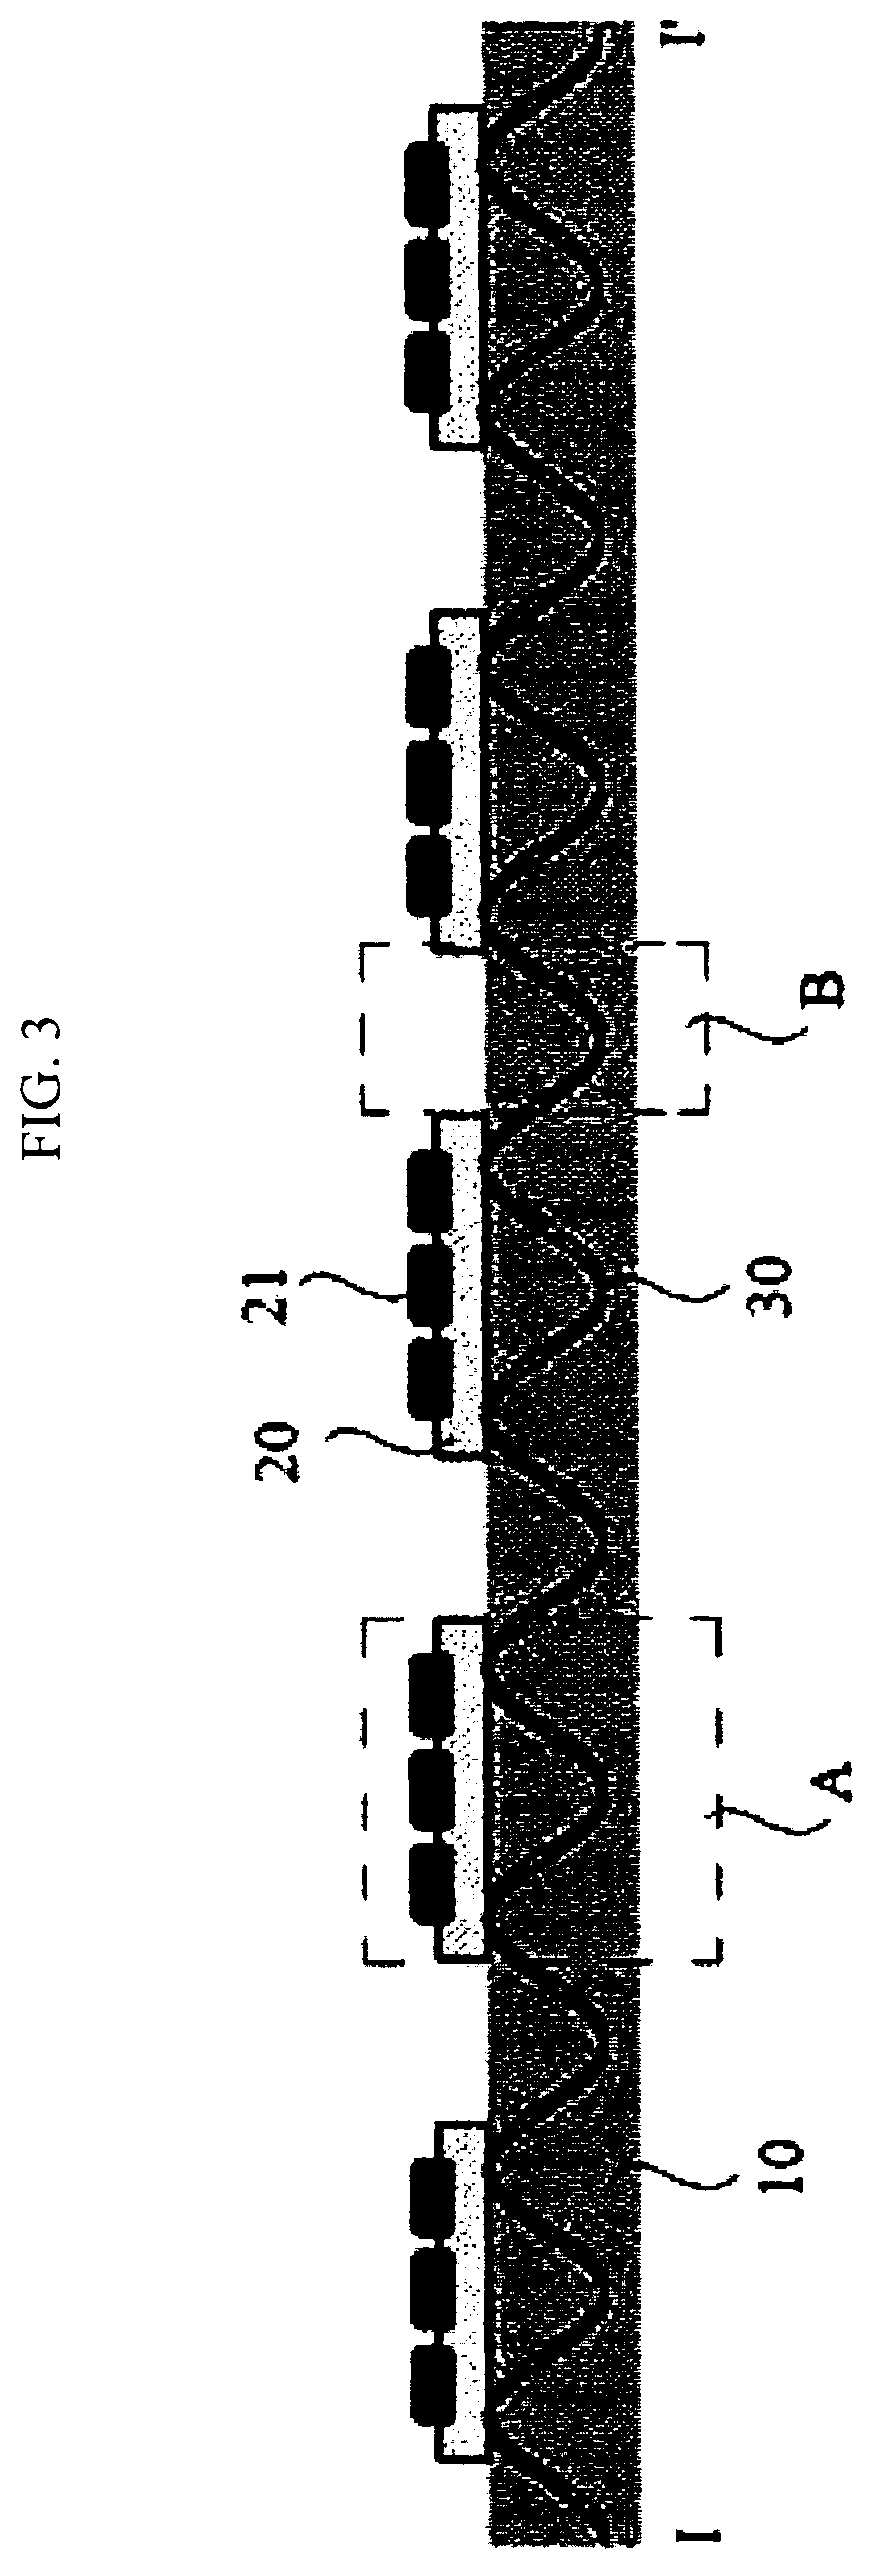 Stretchable display device